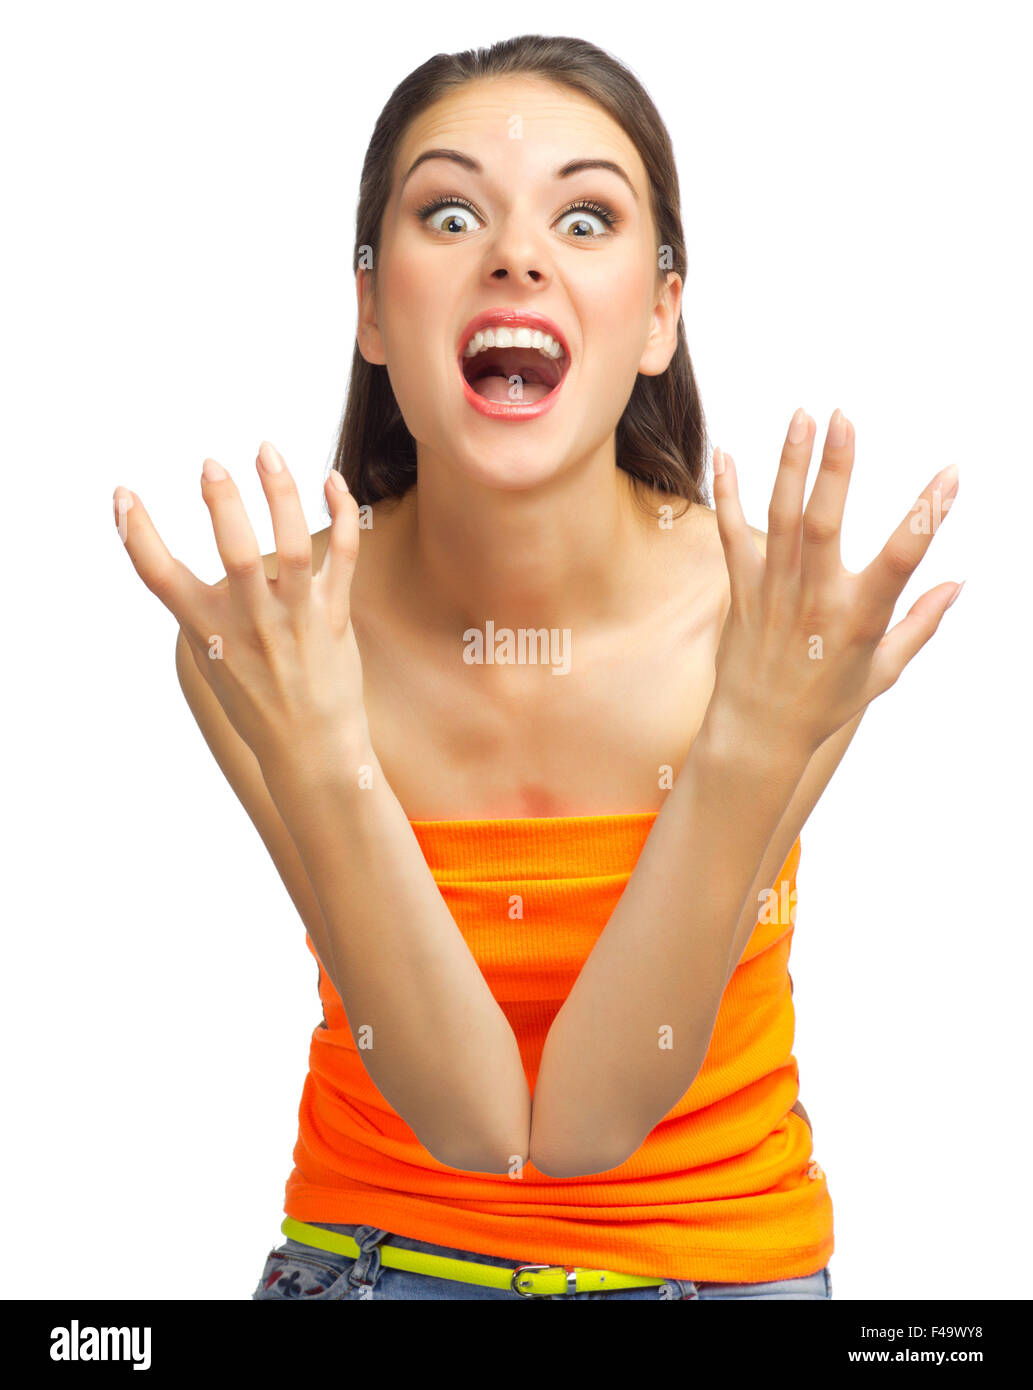 Young screaming girl isolated on white Stock Photo